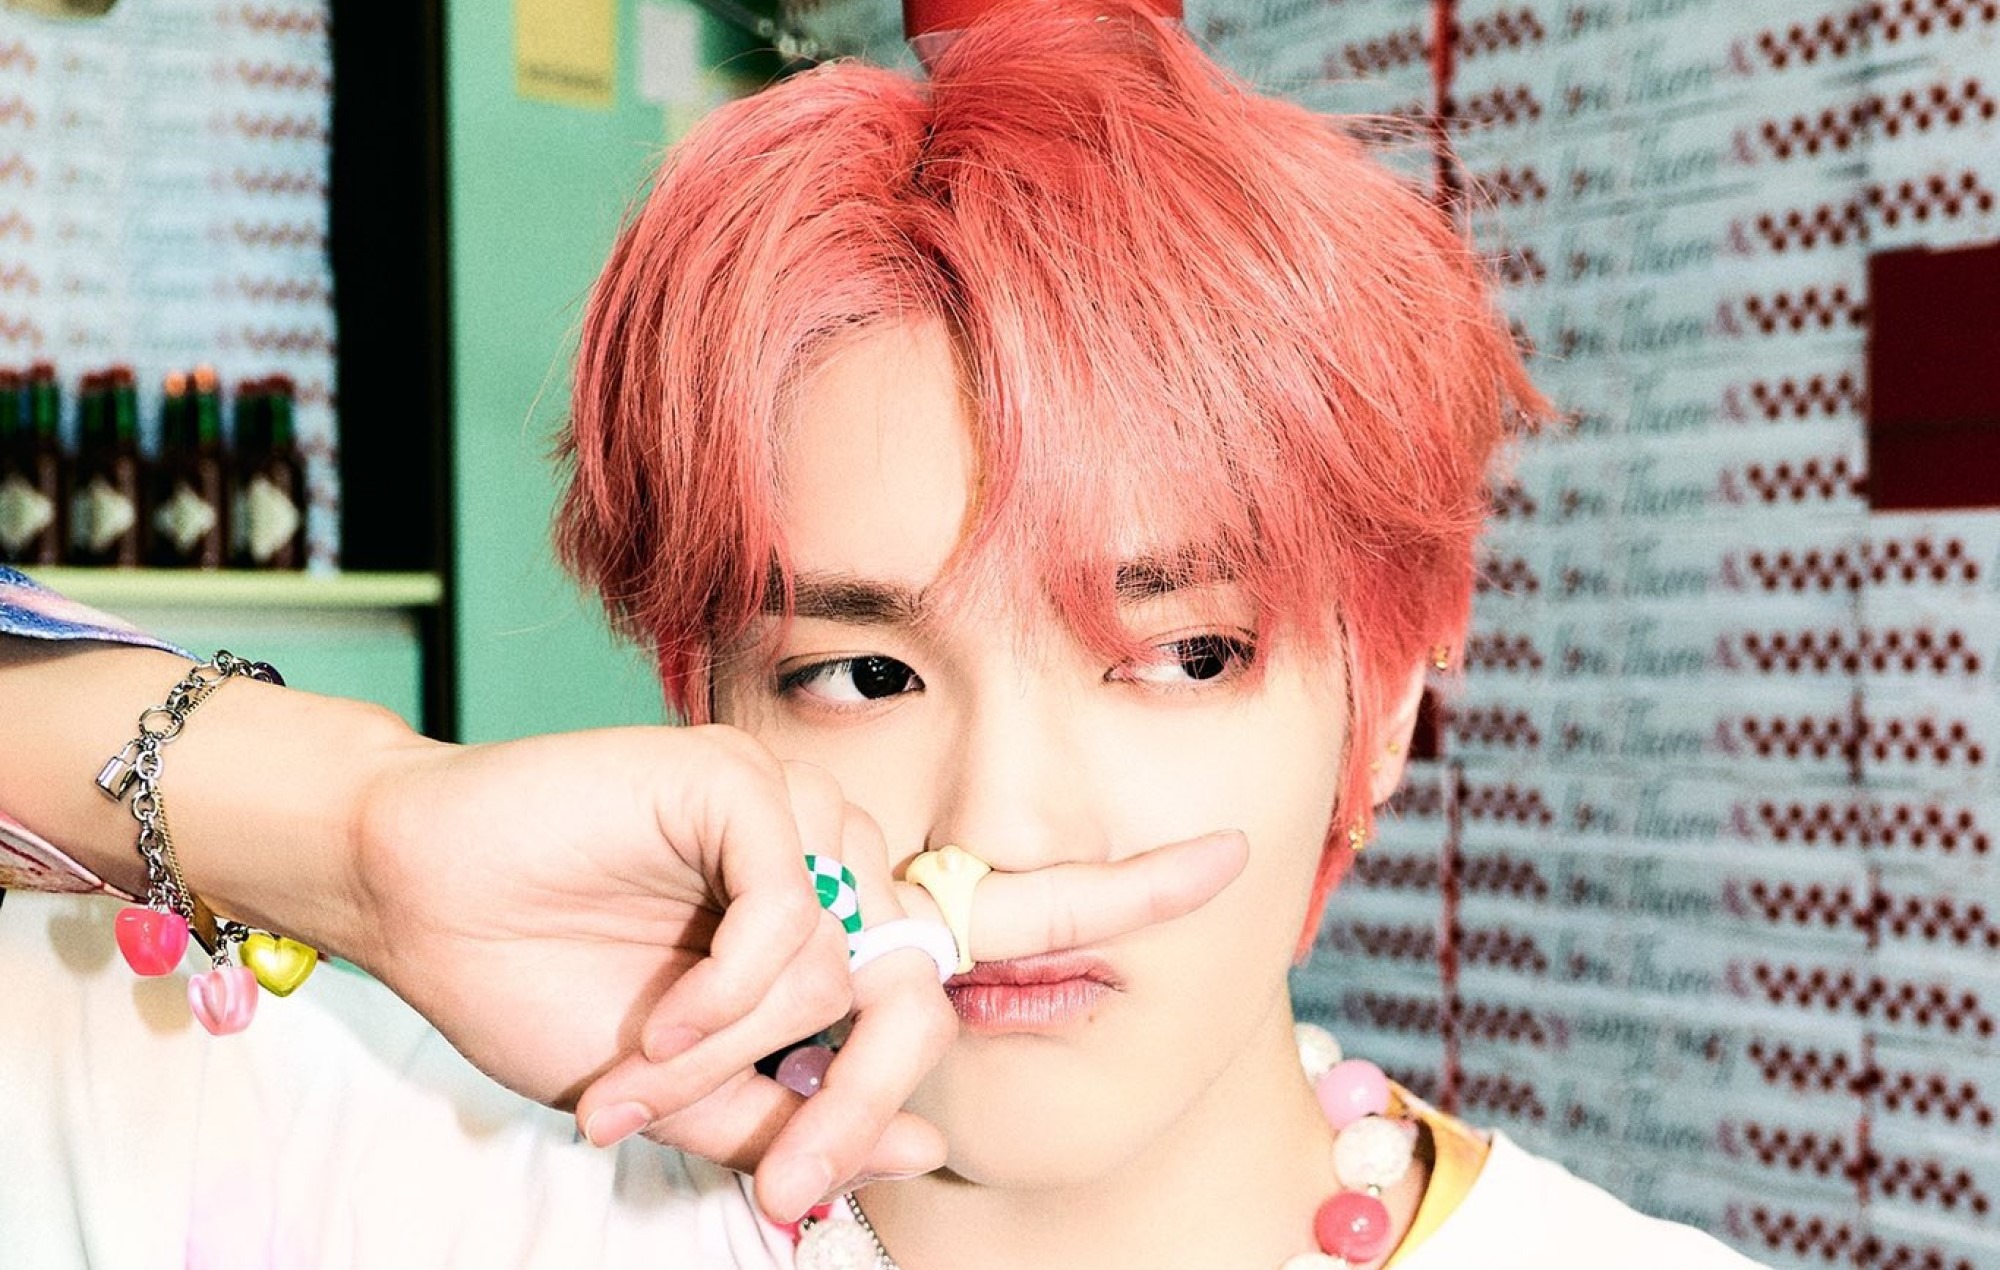 Taeyong on new single ‘Love Theory’: “Love itself is very difficult and complicated for me”